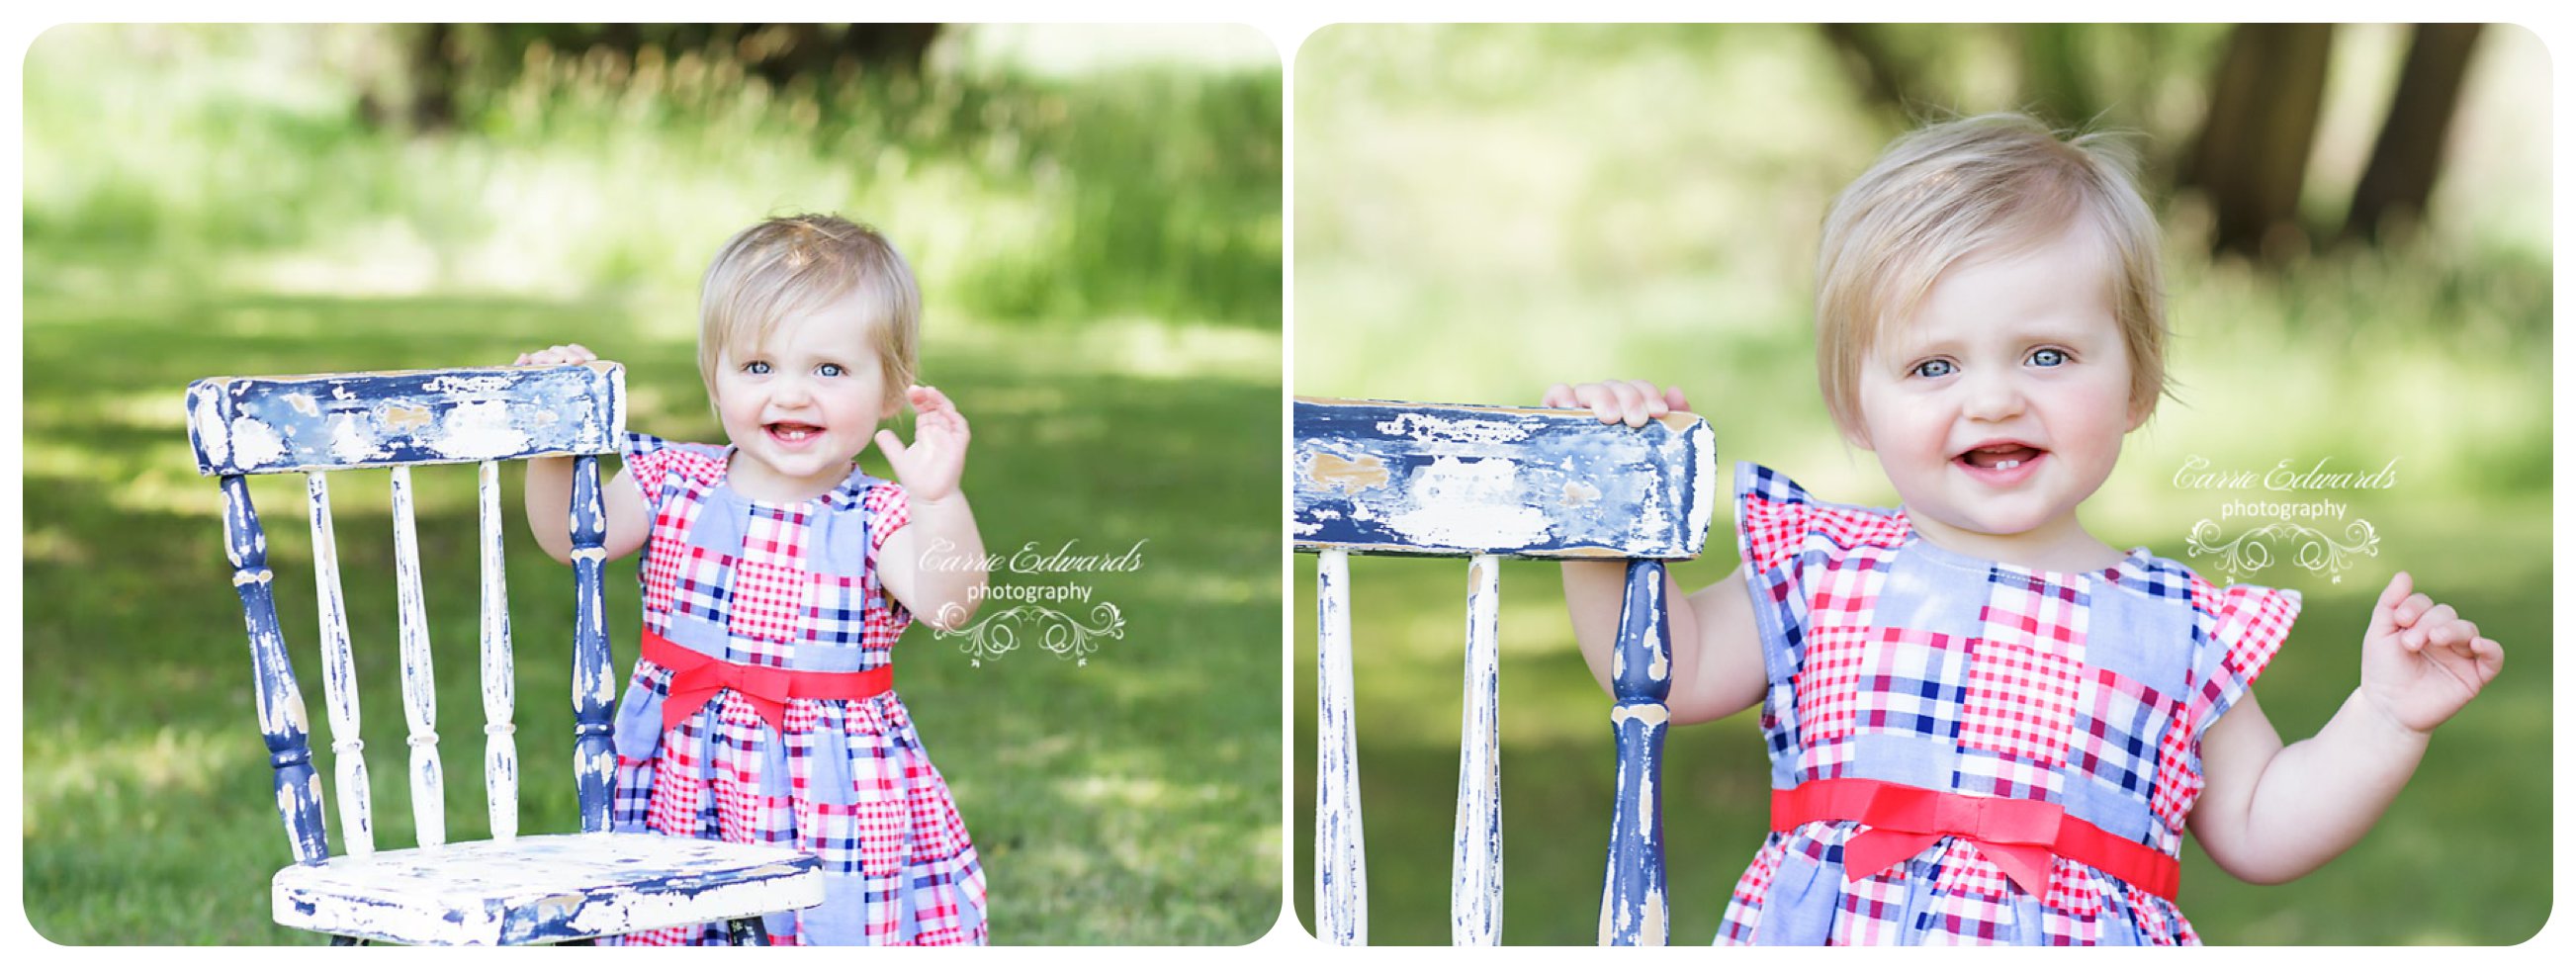 Evergreen Cake Smash Session, 1 year session, 1 year cake smash session, Evergreen Photographer, Evergreen Cake smash session, outdoor photography session, girl with blue chair